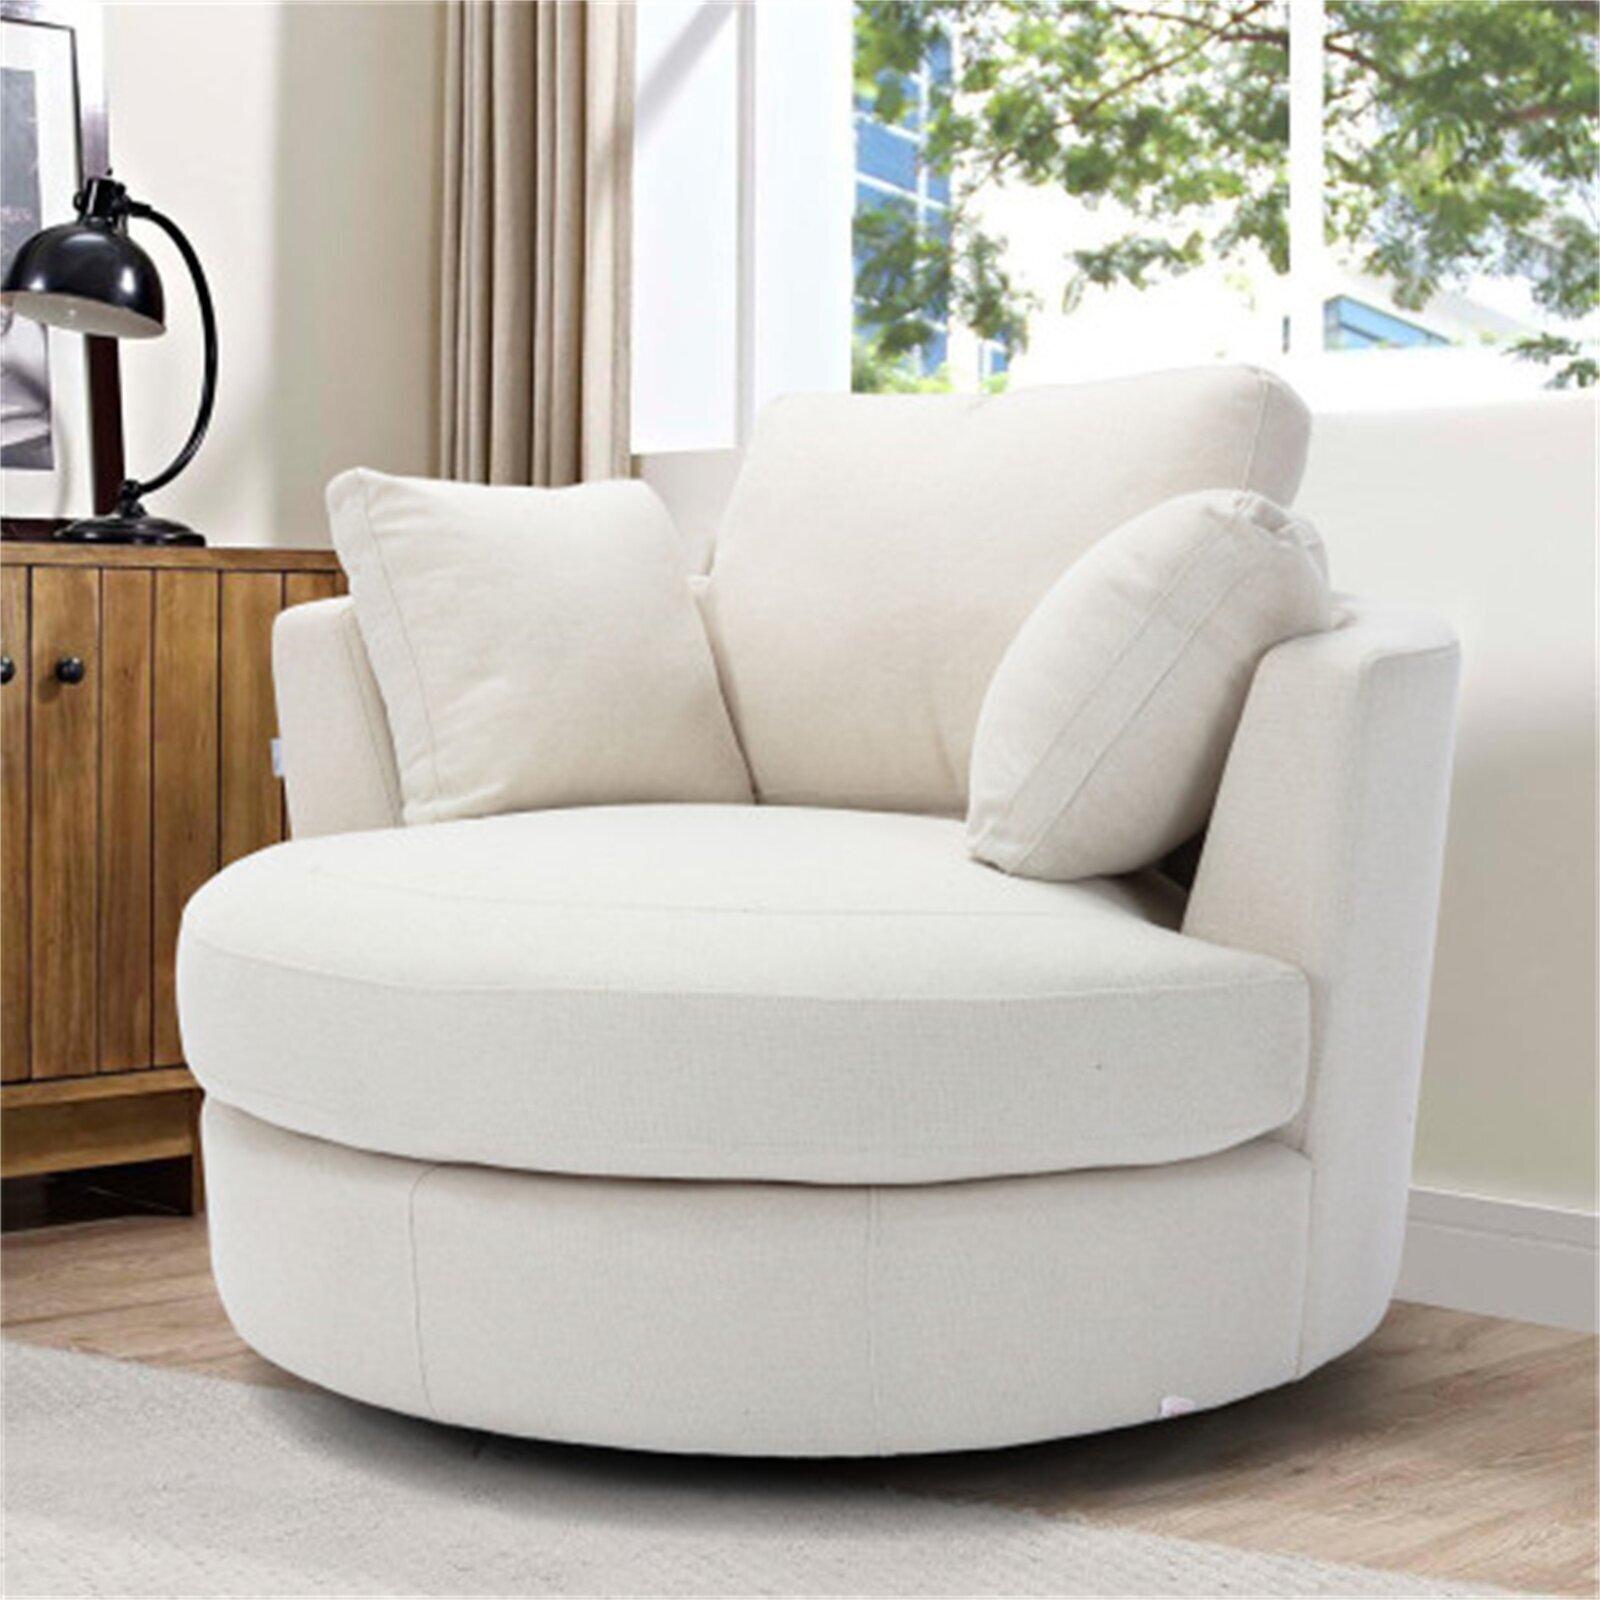 Rounded Wide Swivel Loveseat